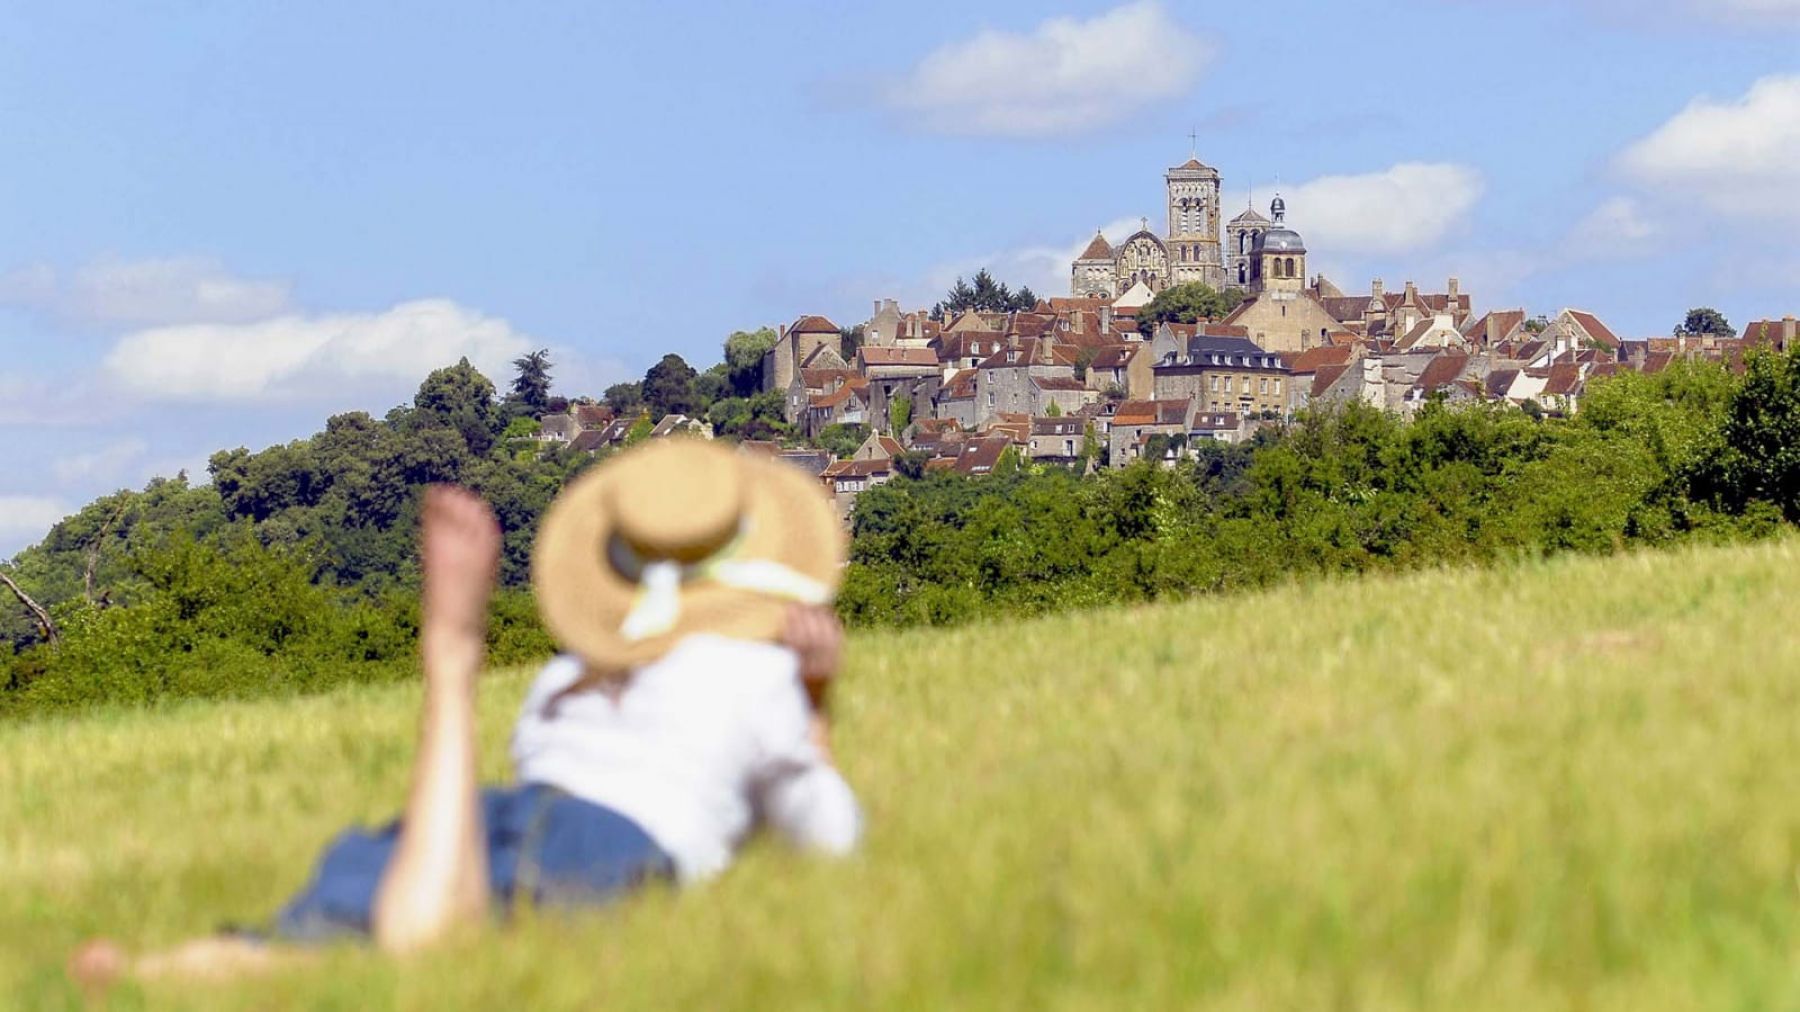 Where to stay in Burgundy?